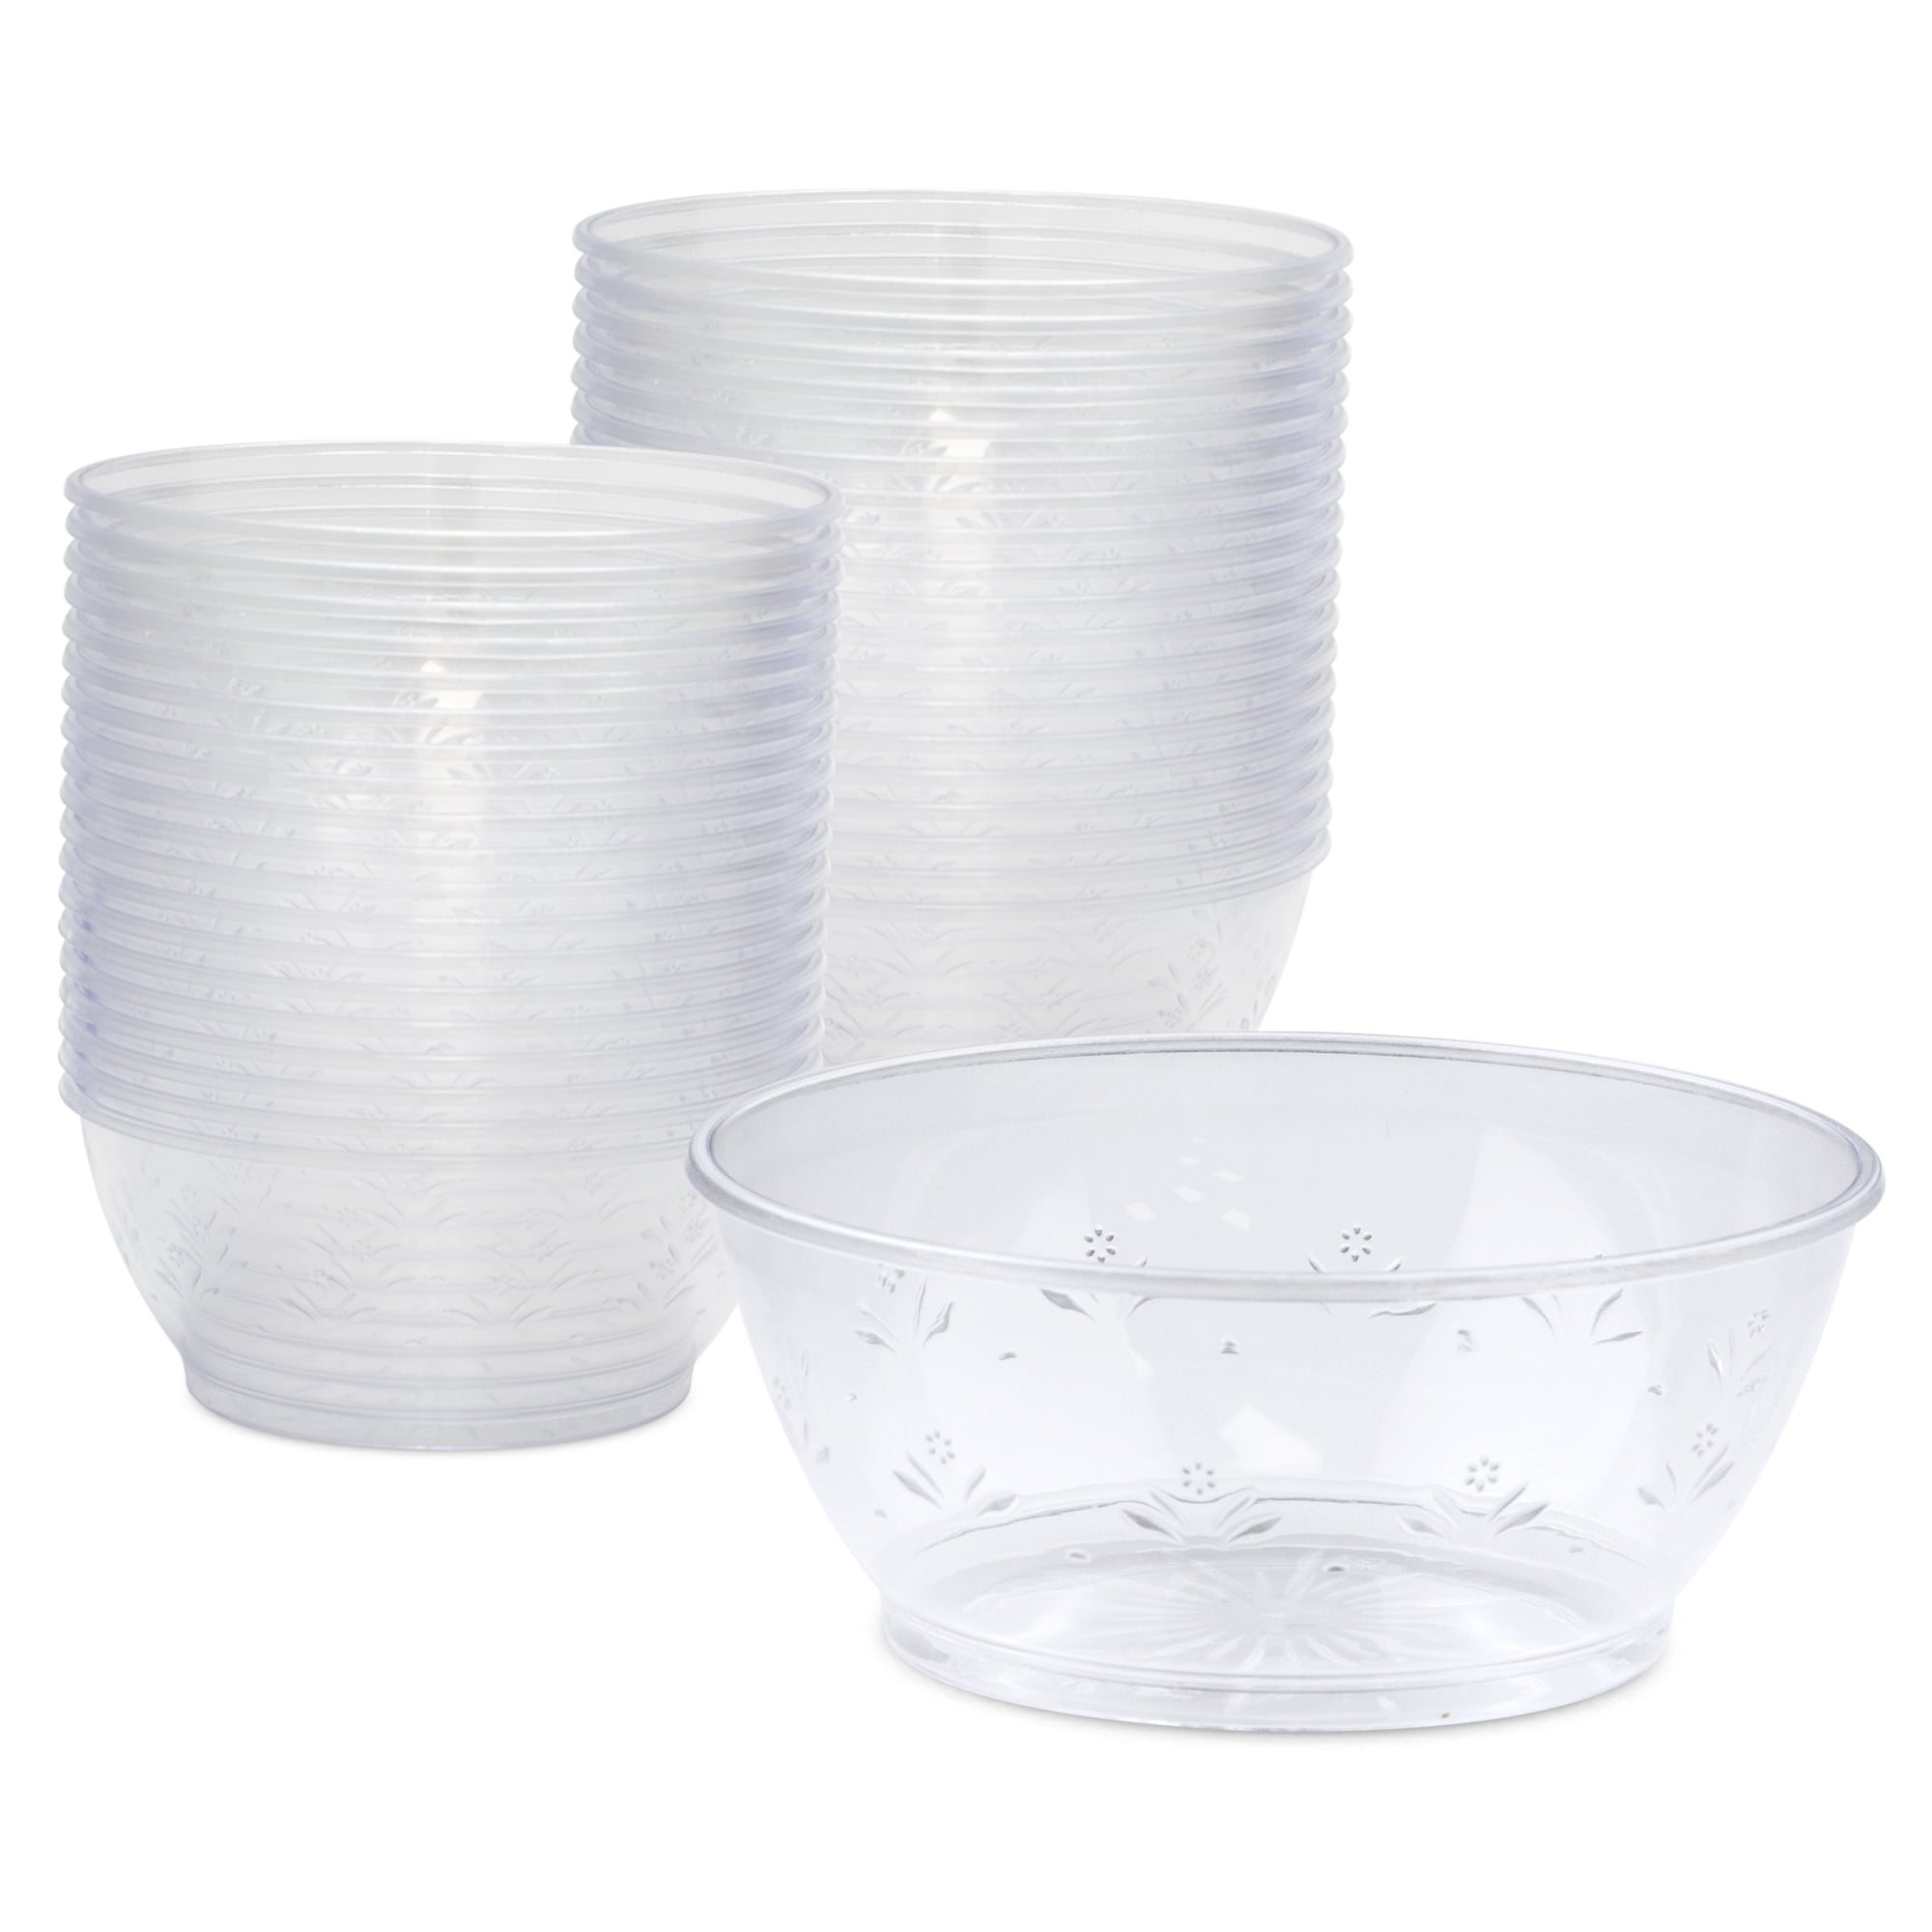 Premium Quality Heavyweight Plastic Bowls China Like Wedding and Party Dinnerware Plastic Bowls 14 oz Clear-Value Pack 30 Count 